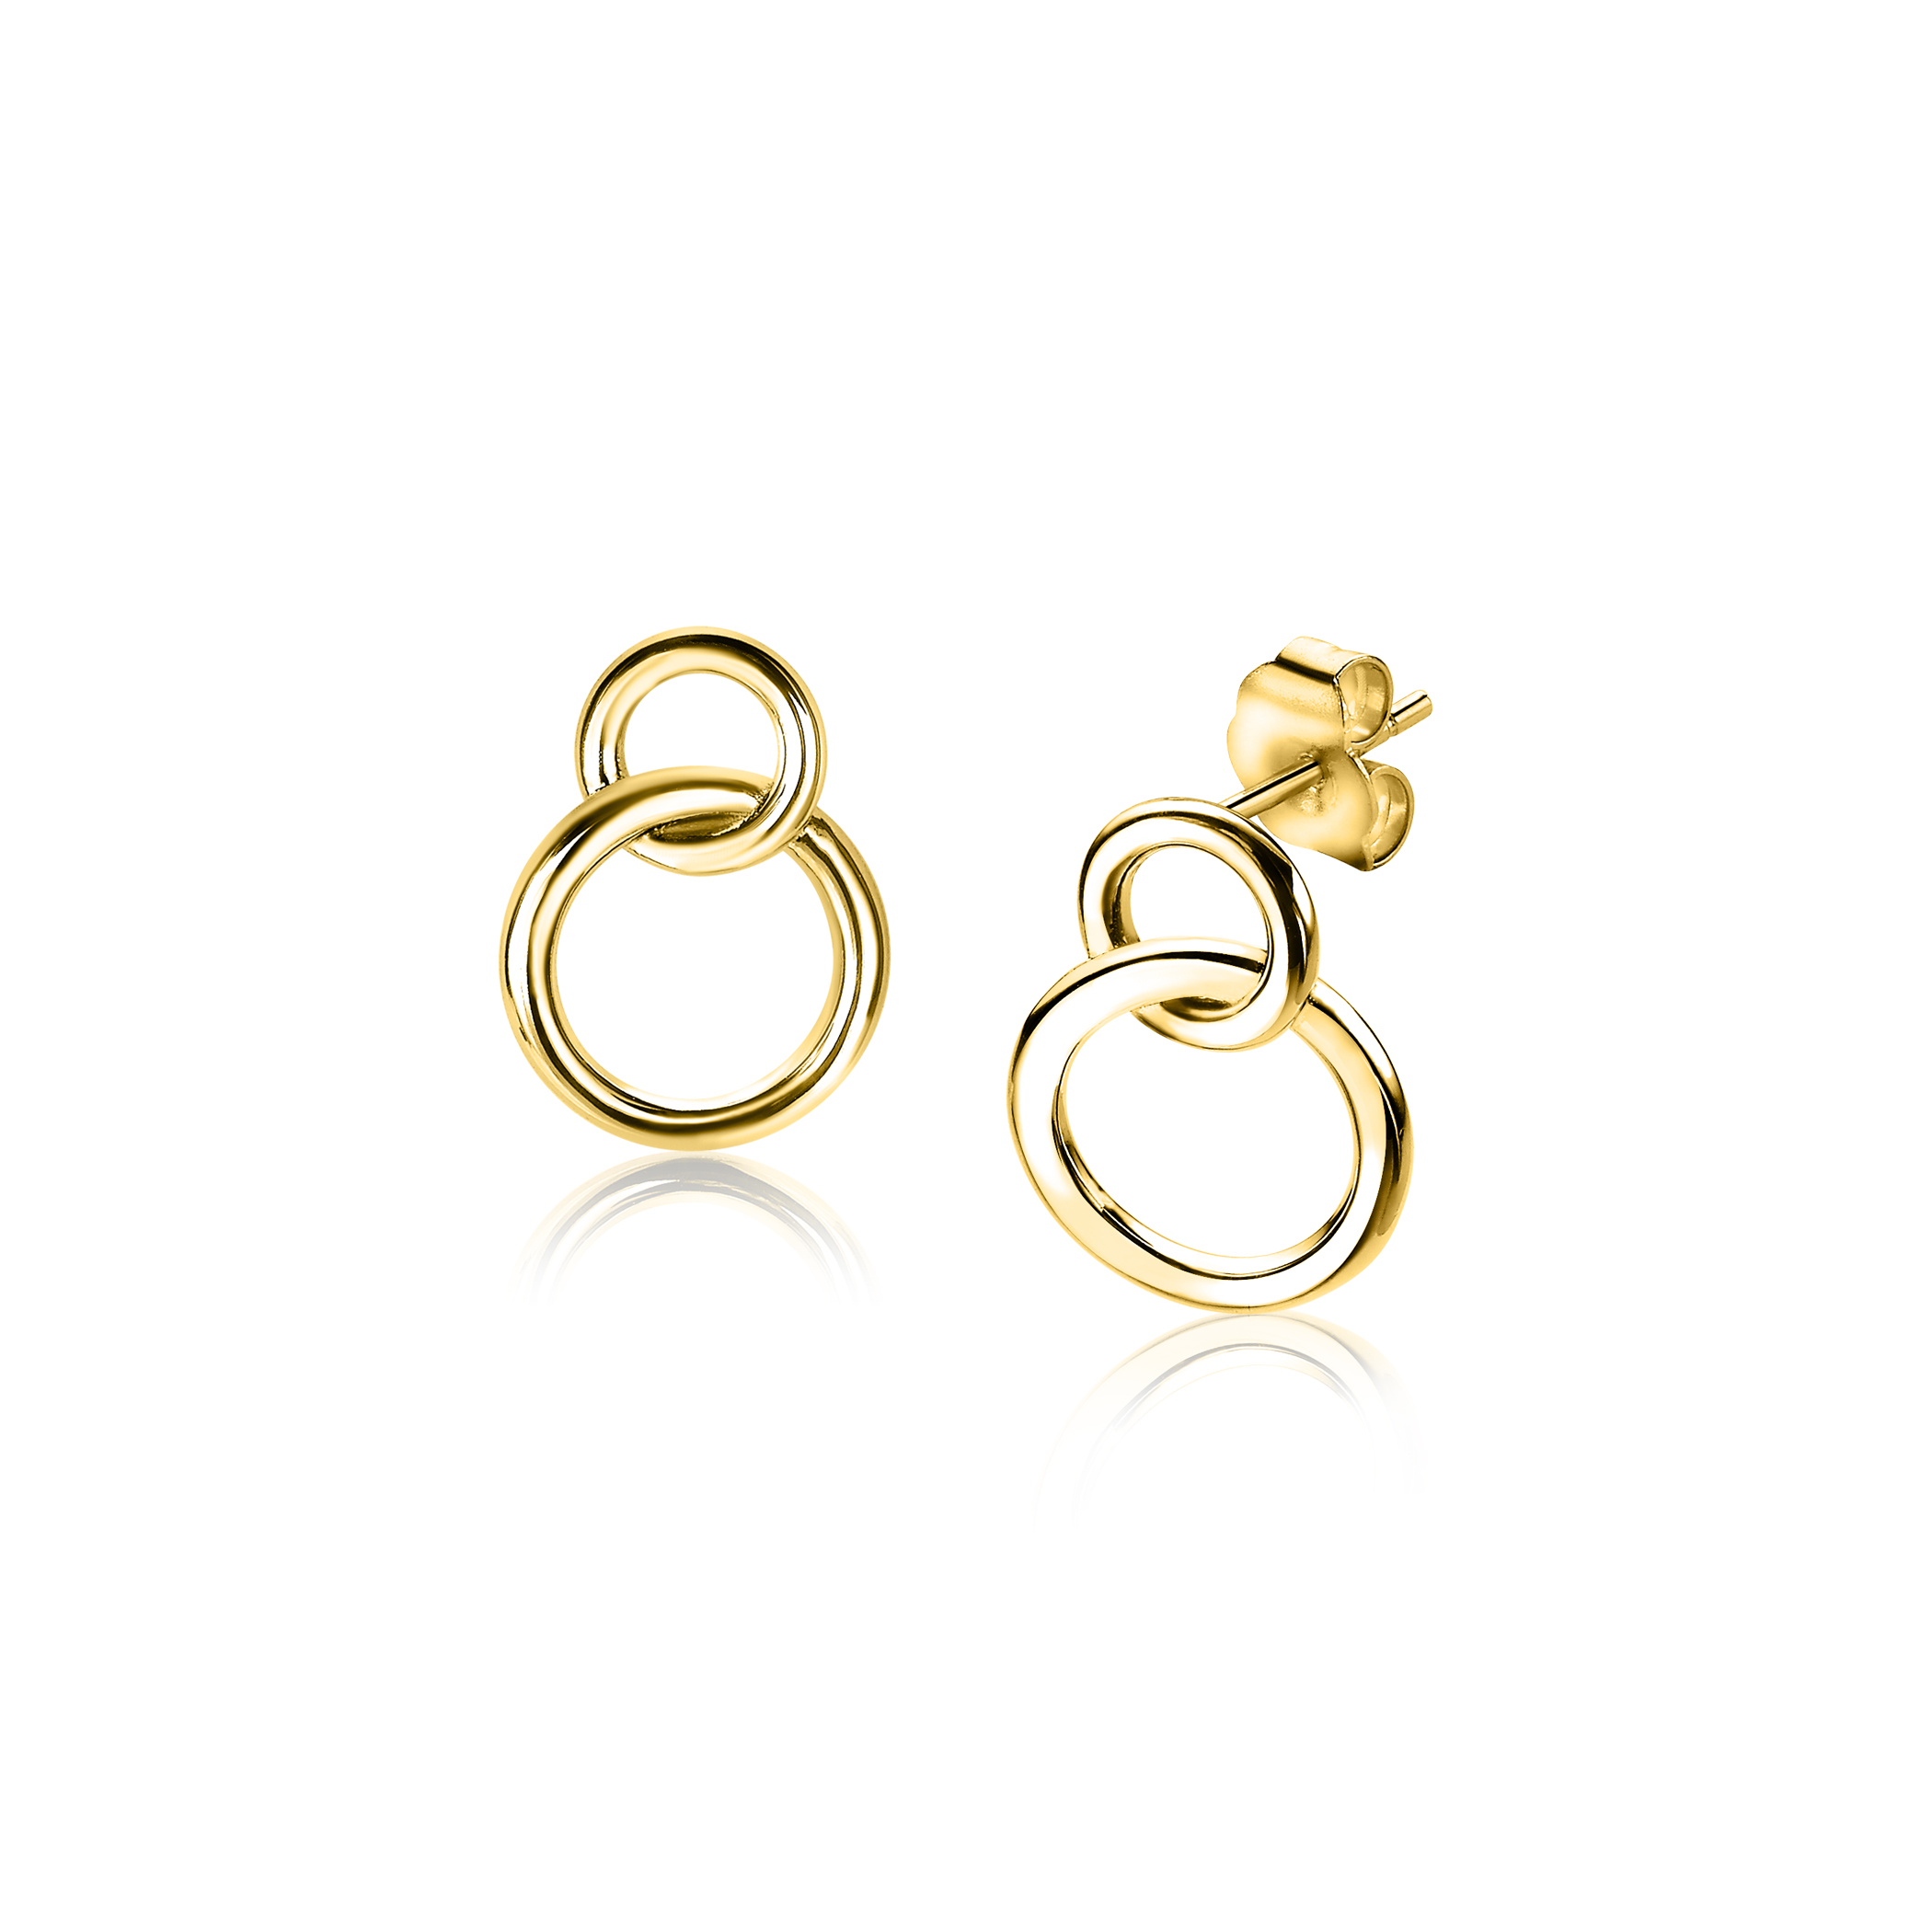 ZINZI Gold Plated Sterling Silver Stud Earrings with 2 Connected Open Circles ZIO1278G